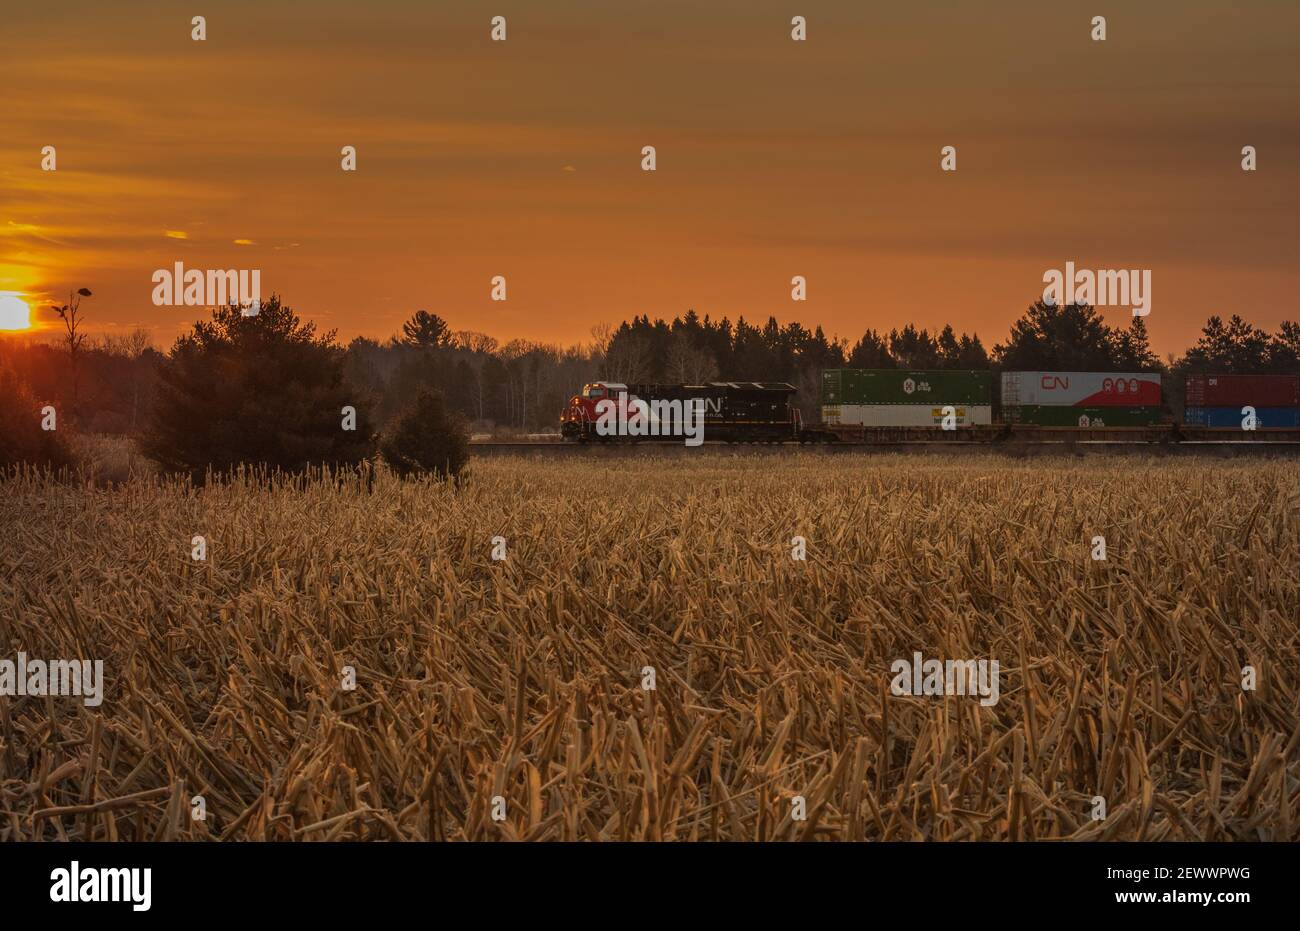 An early morning freight train passing through a farming community in northern Wisconsin. Stock Photo